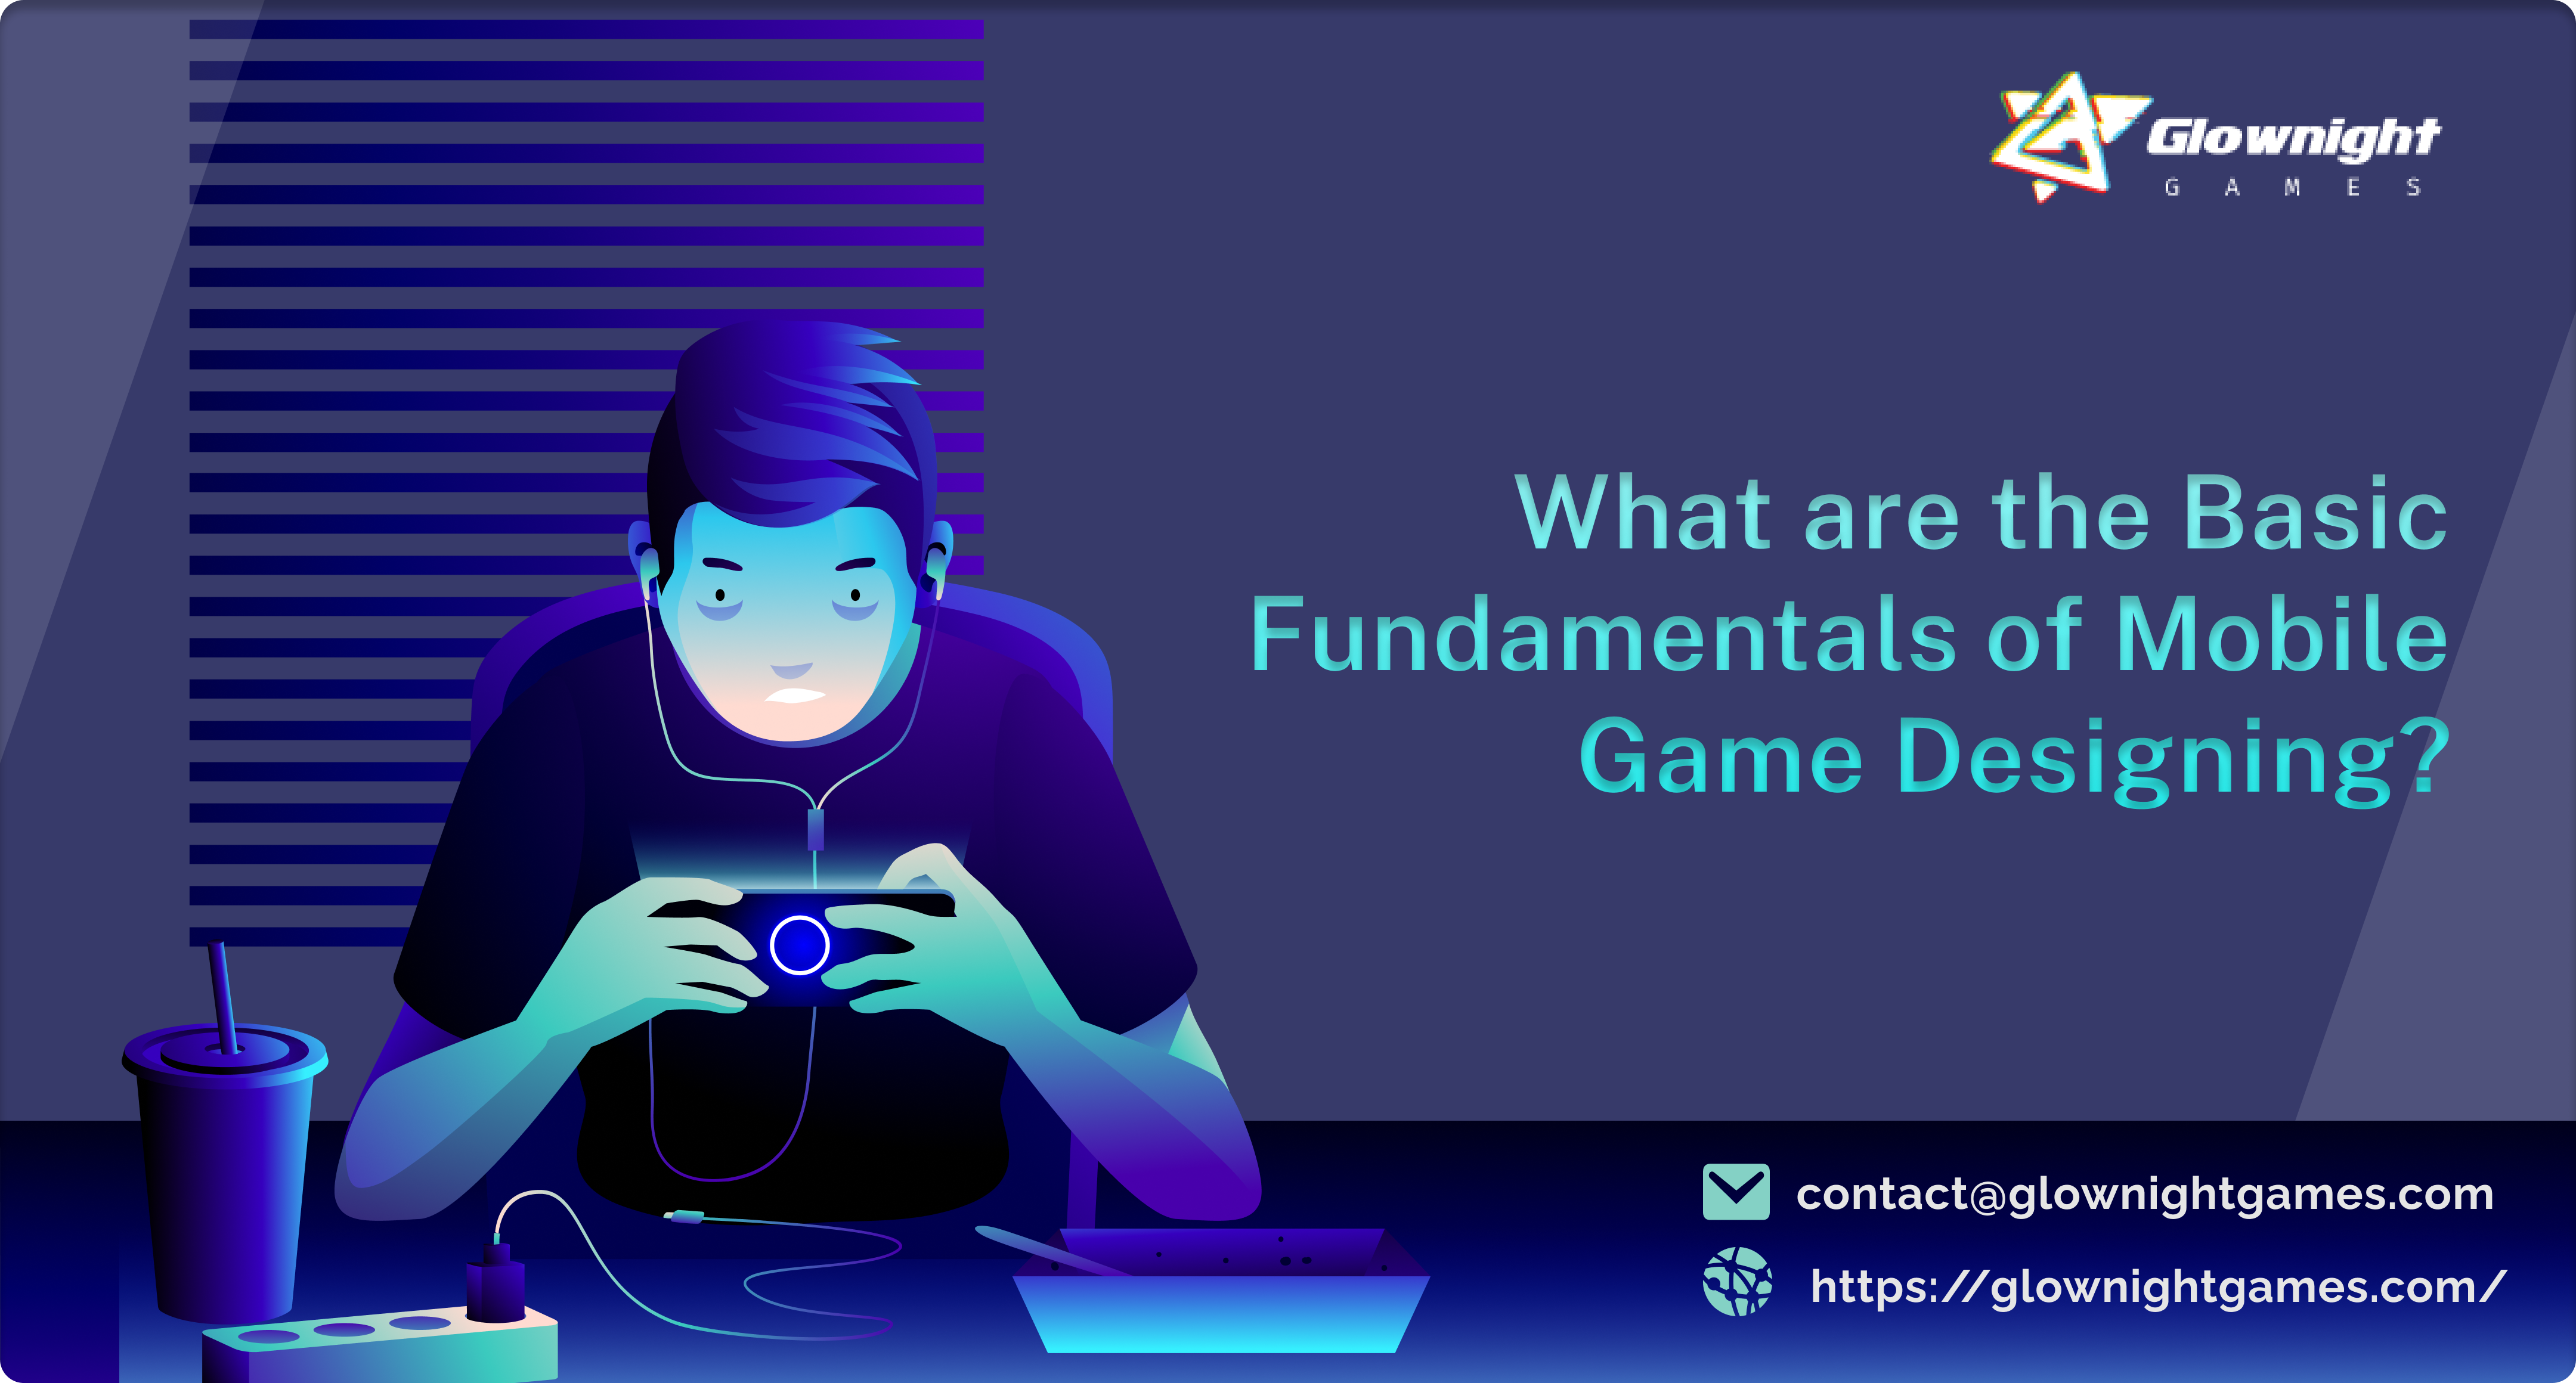 public/uploads/2021/05/What-are-the-Basic-Fundamentals-of-Mobile-Game-Designing.png